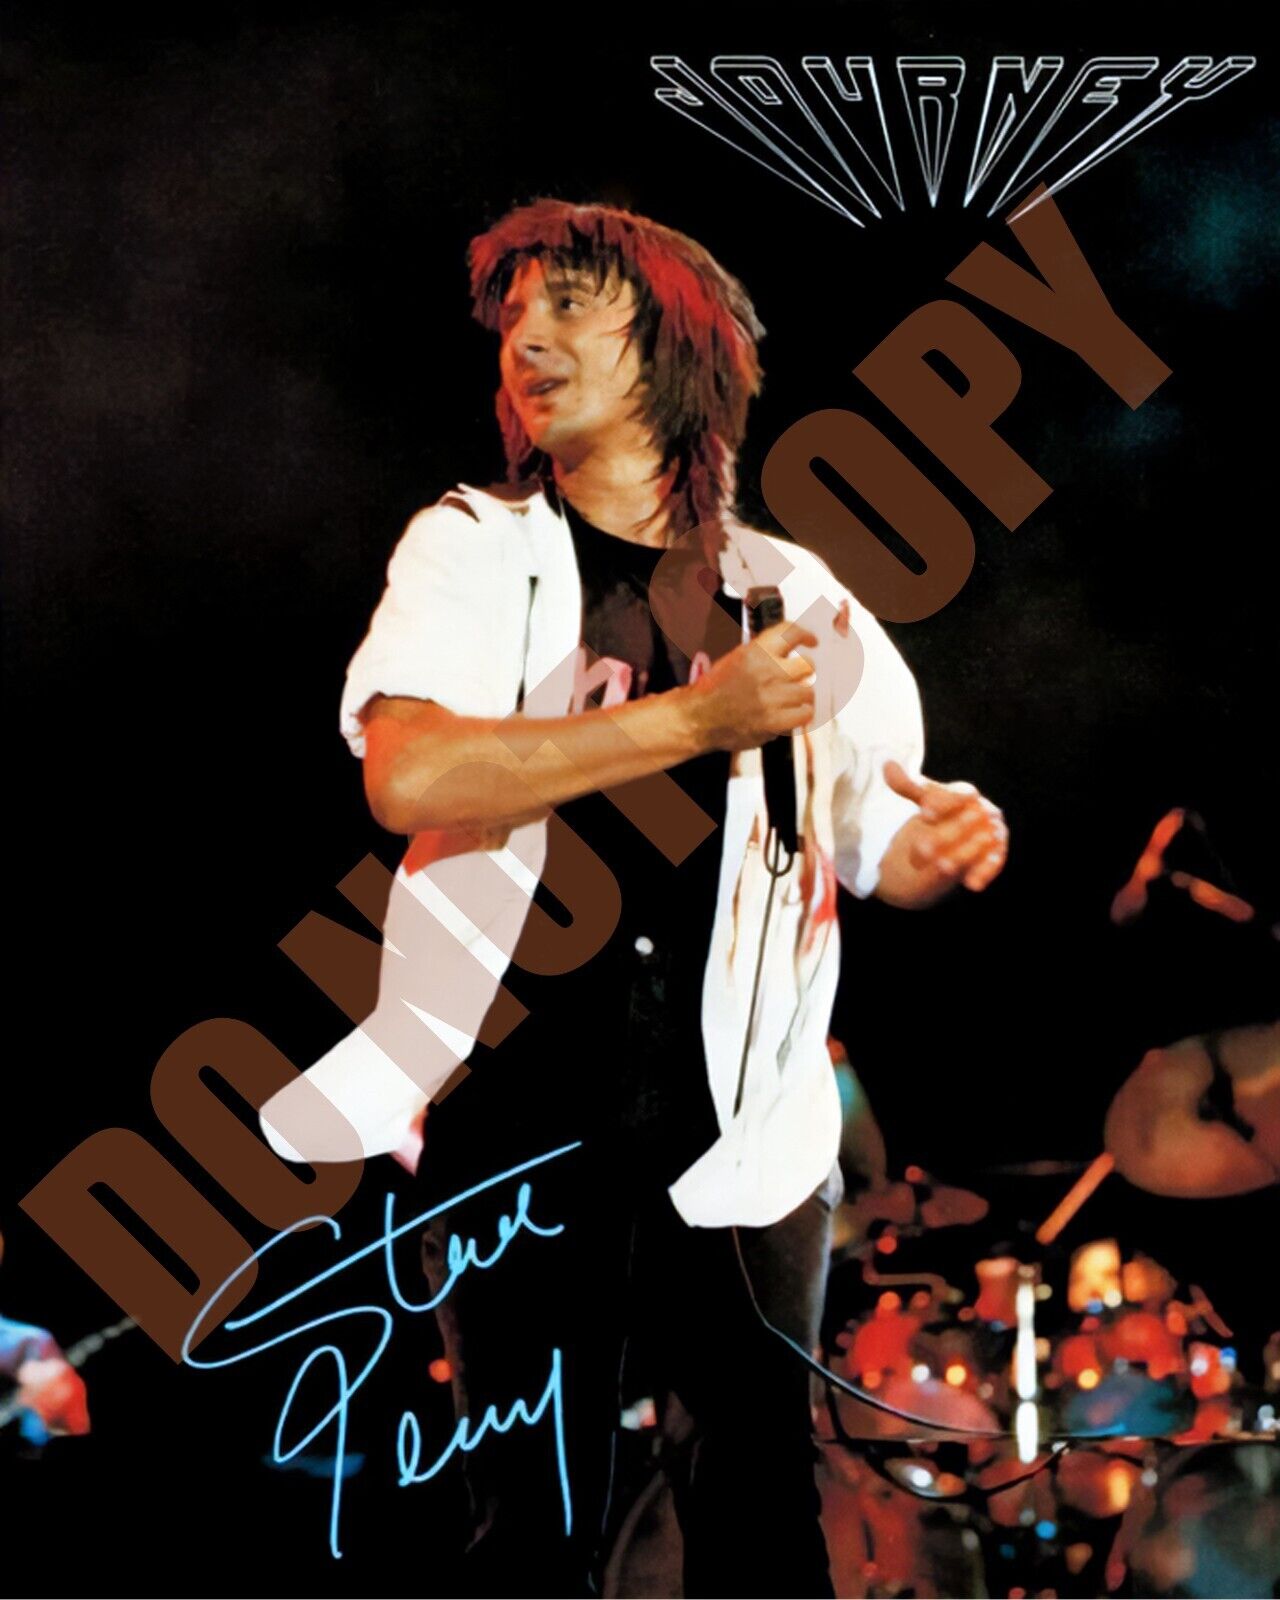 Steve Perry From Journey In Concert Promo Preprint Signature 8x10 Photo